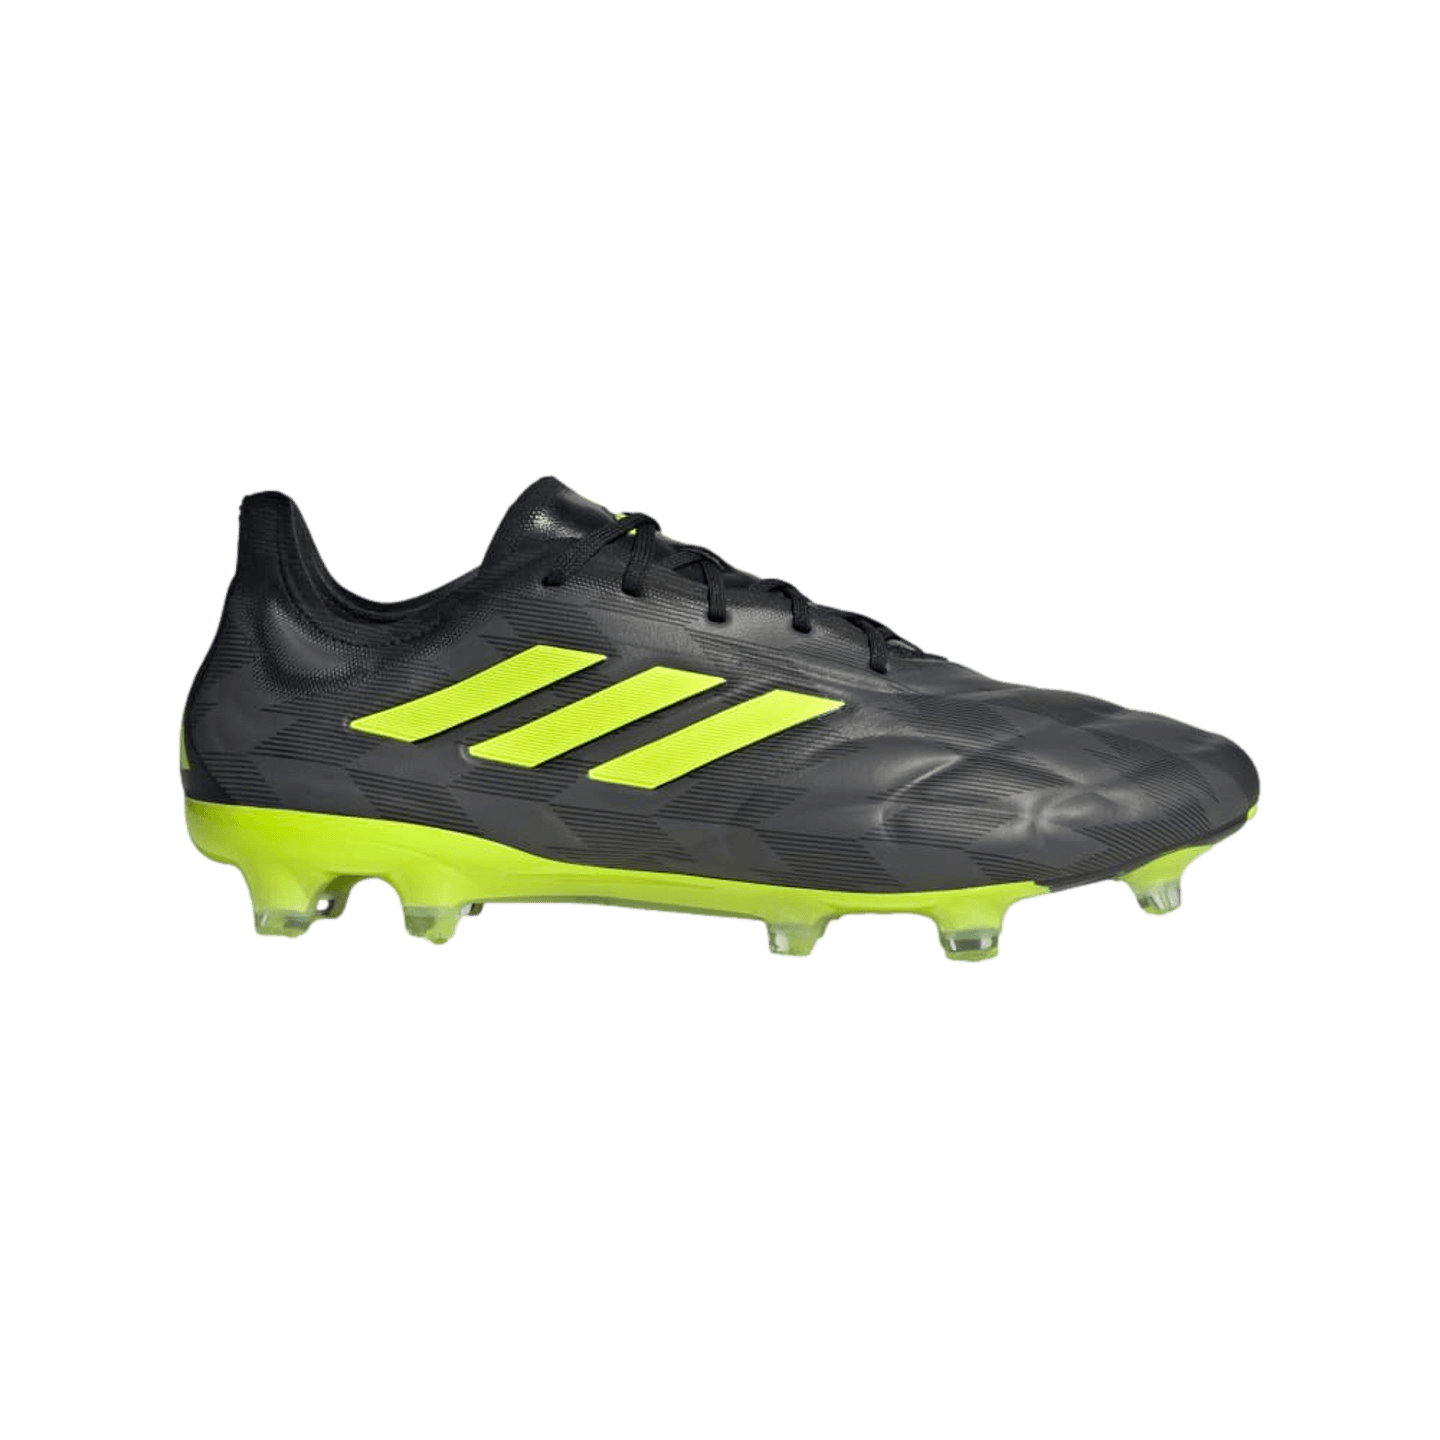 Adidas Copa Pure Injection.1 Firm Ground Cleats